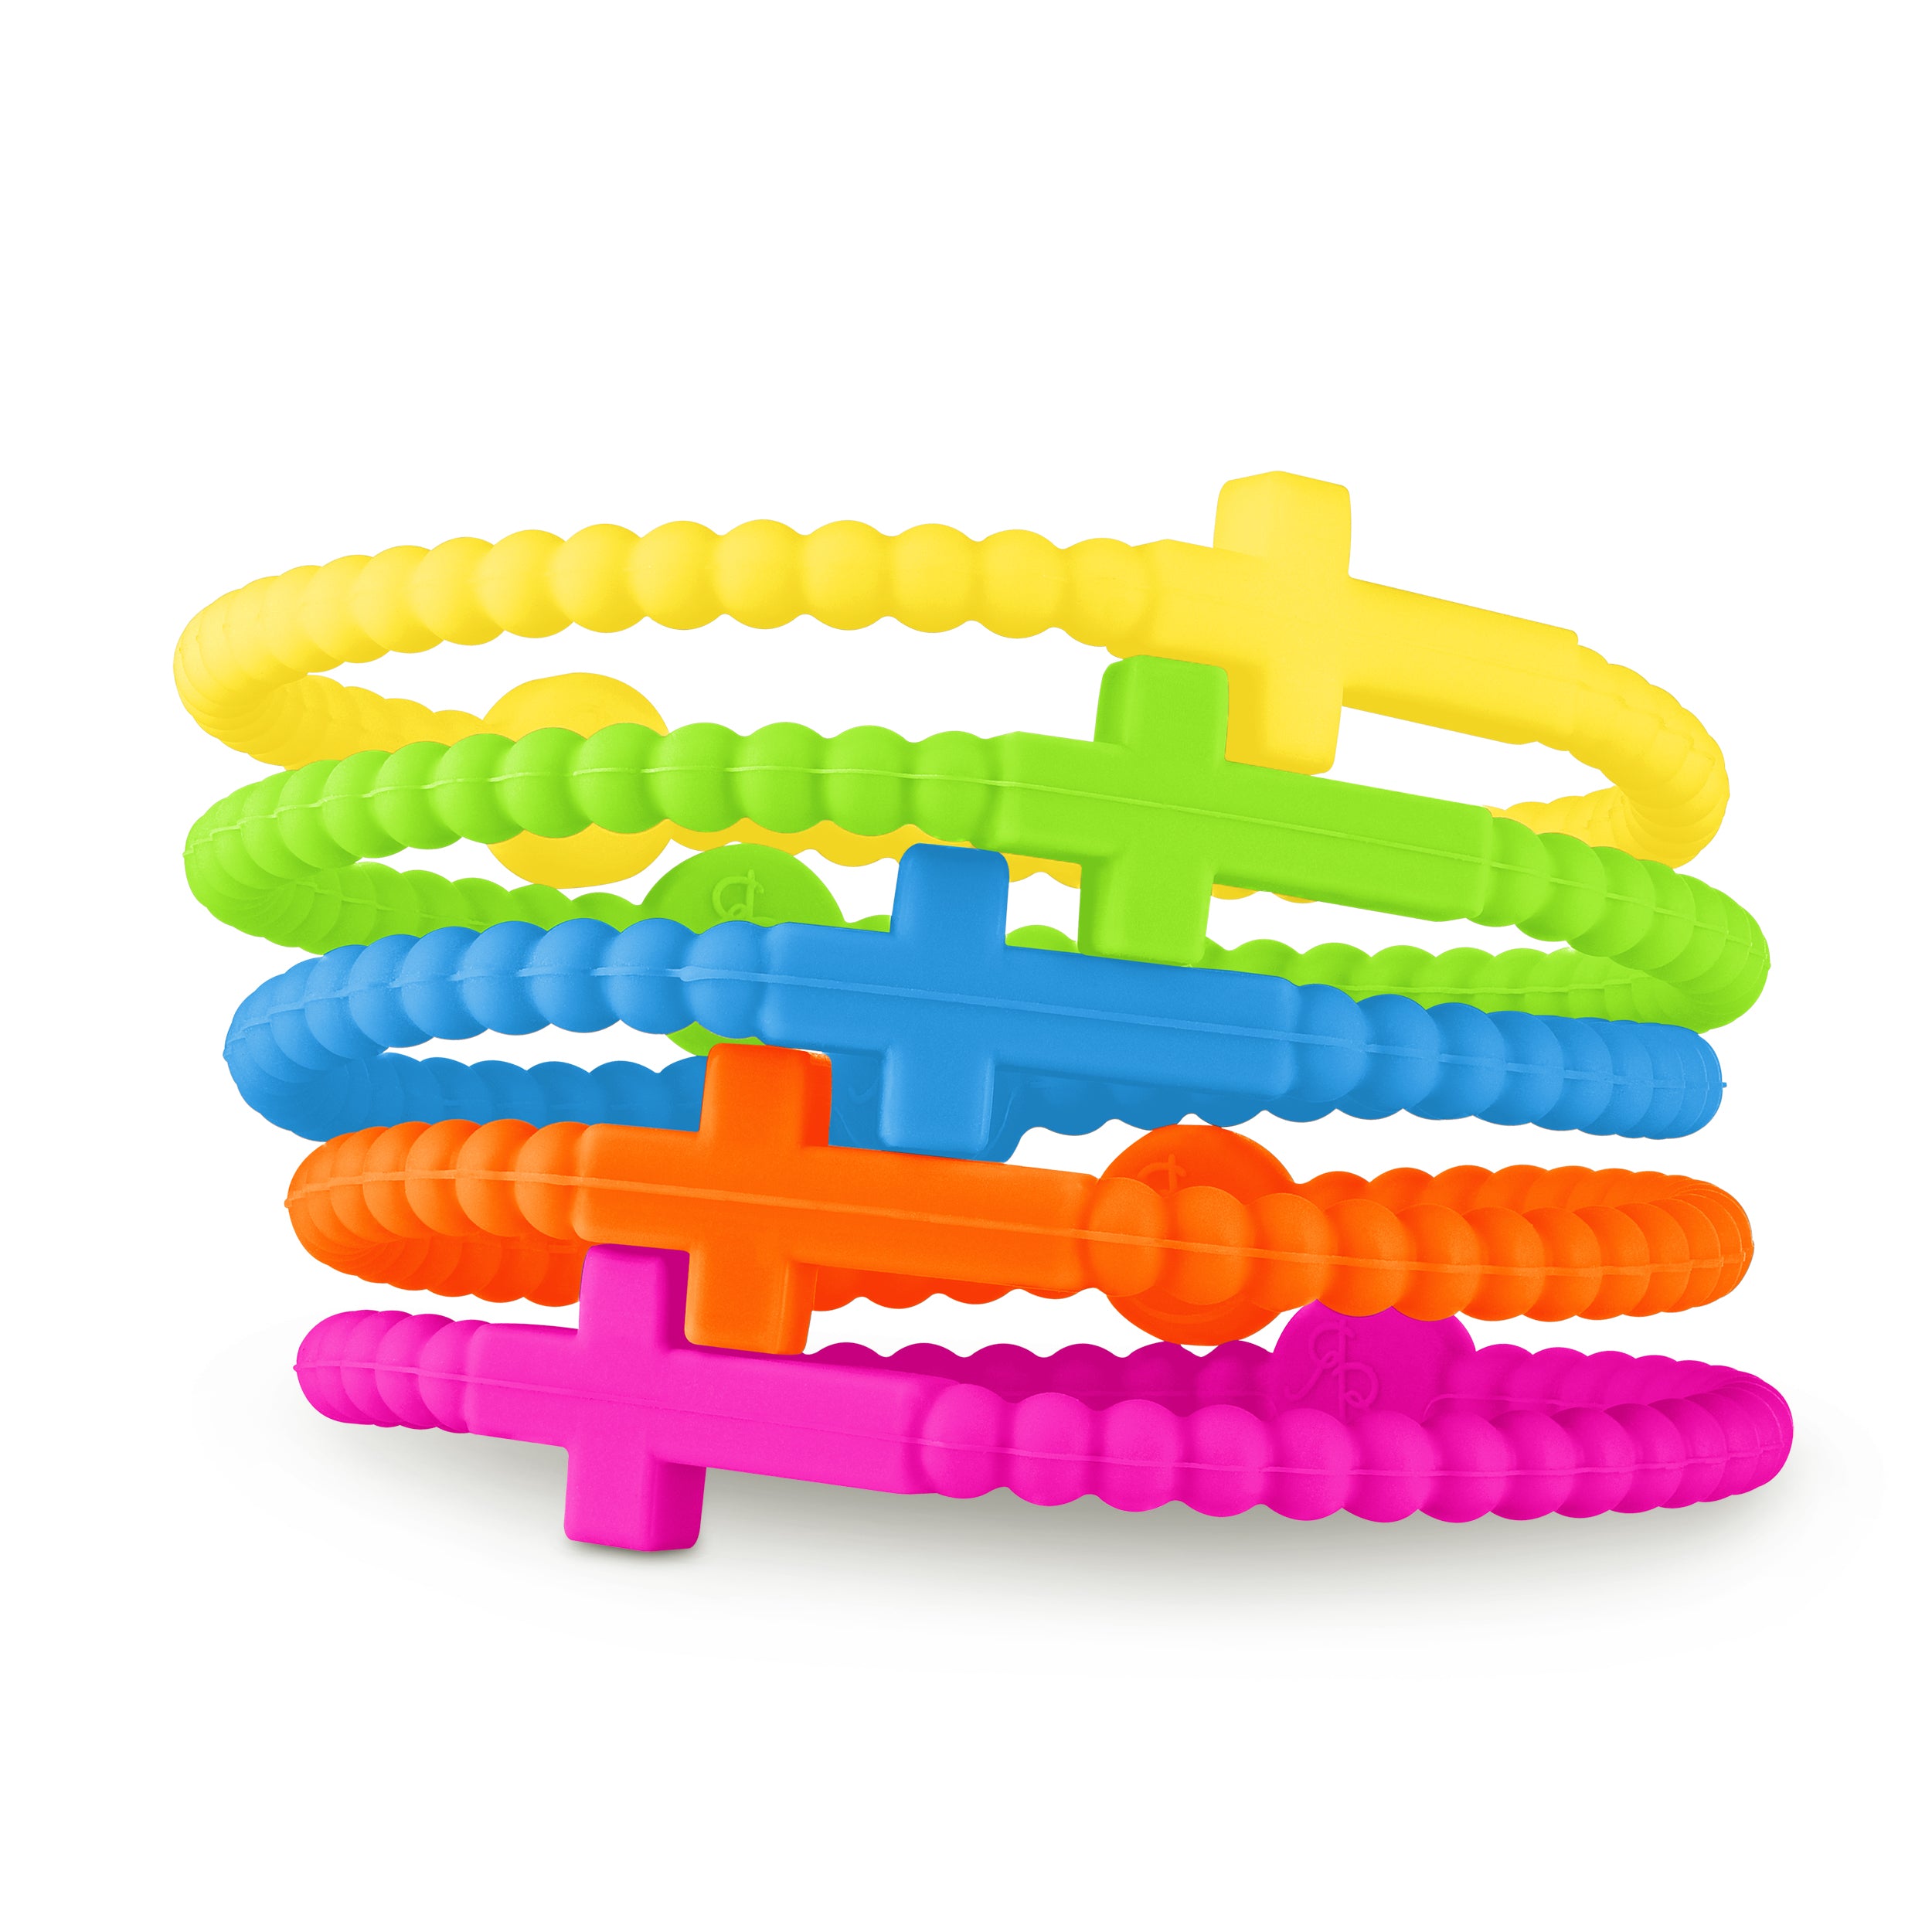 GIRLS THIN NEON Jelly Bracelet Gummy Bangle Rubber Goth Wristband various  Color £2.85 - PicClick UK